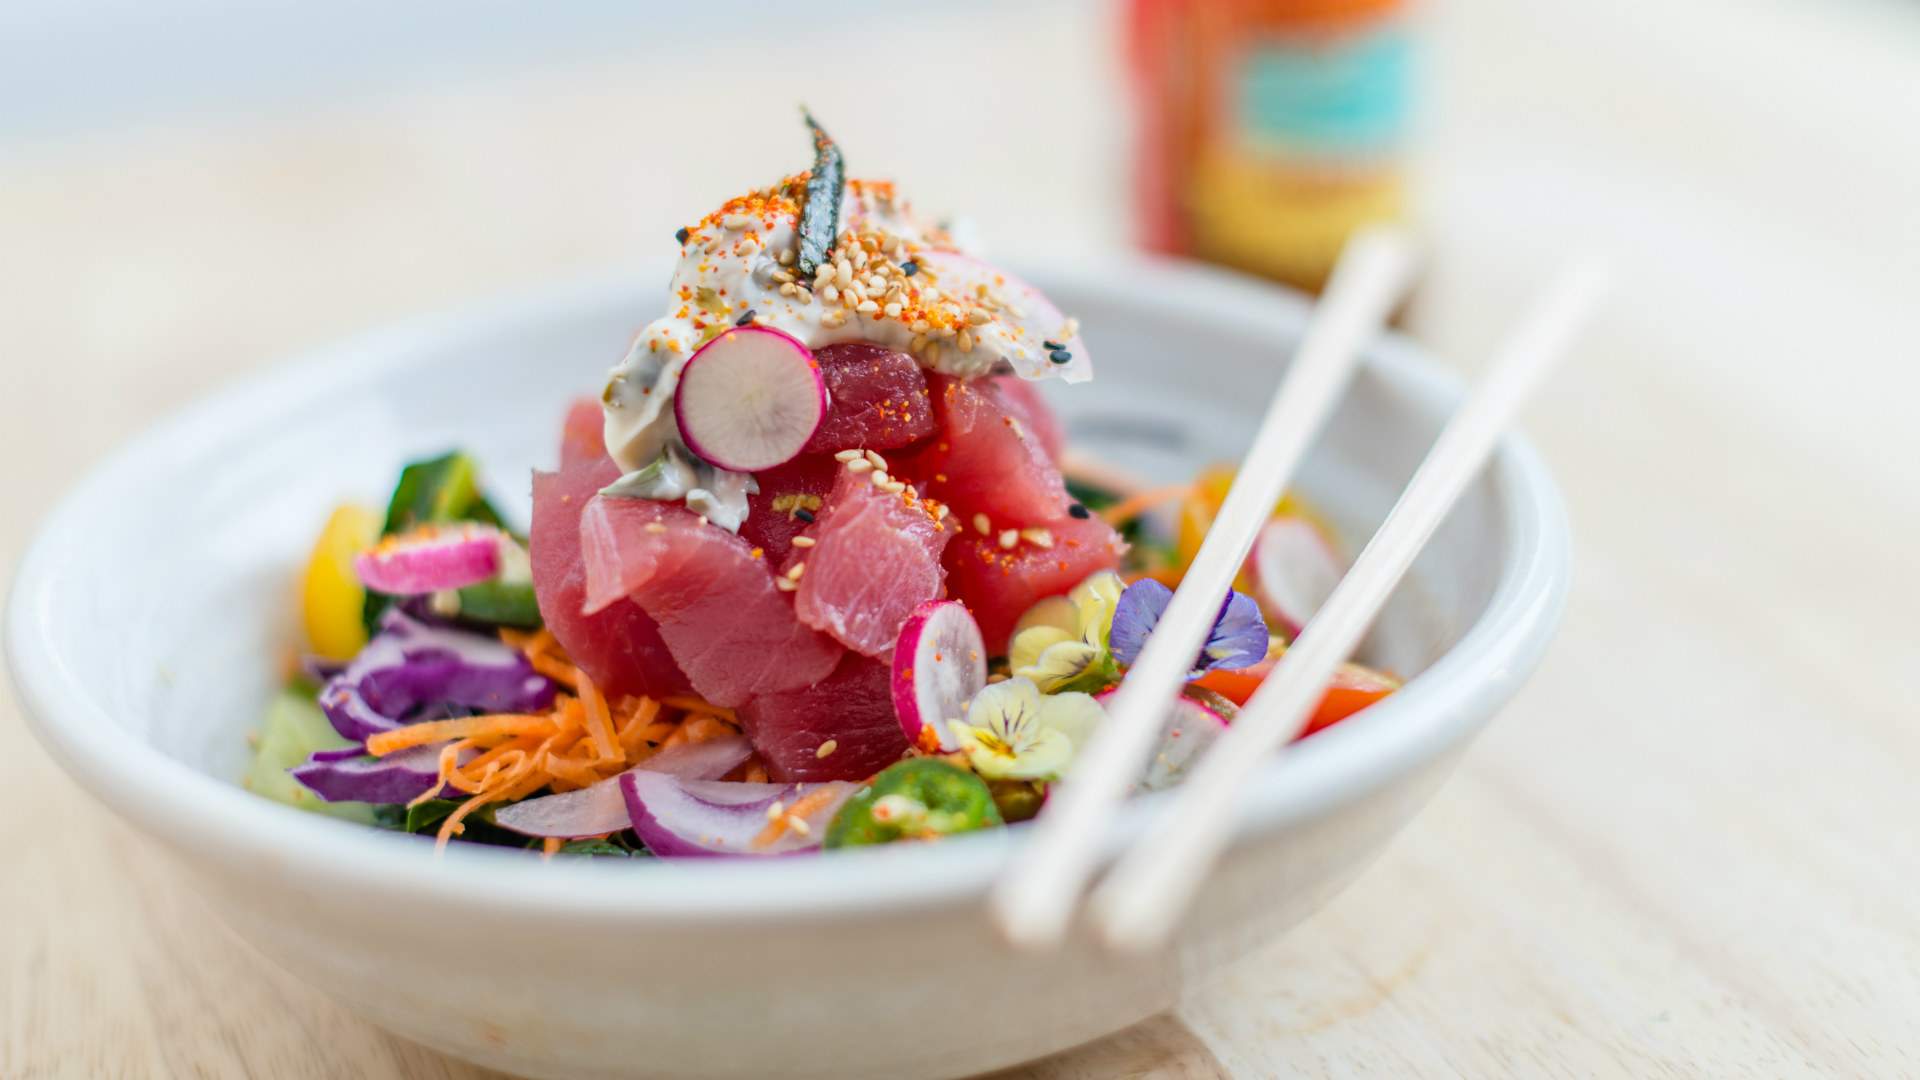 Mahalo Poke Is Bringing Bowls, Beer and Breakfast to Their First Permanent Store